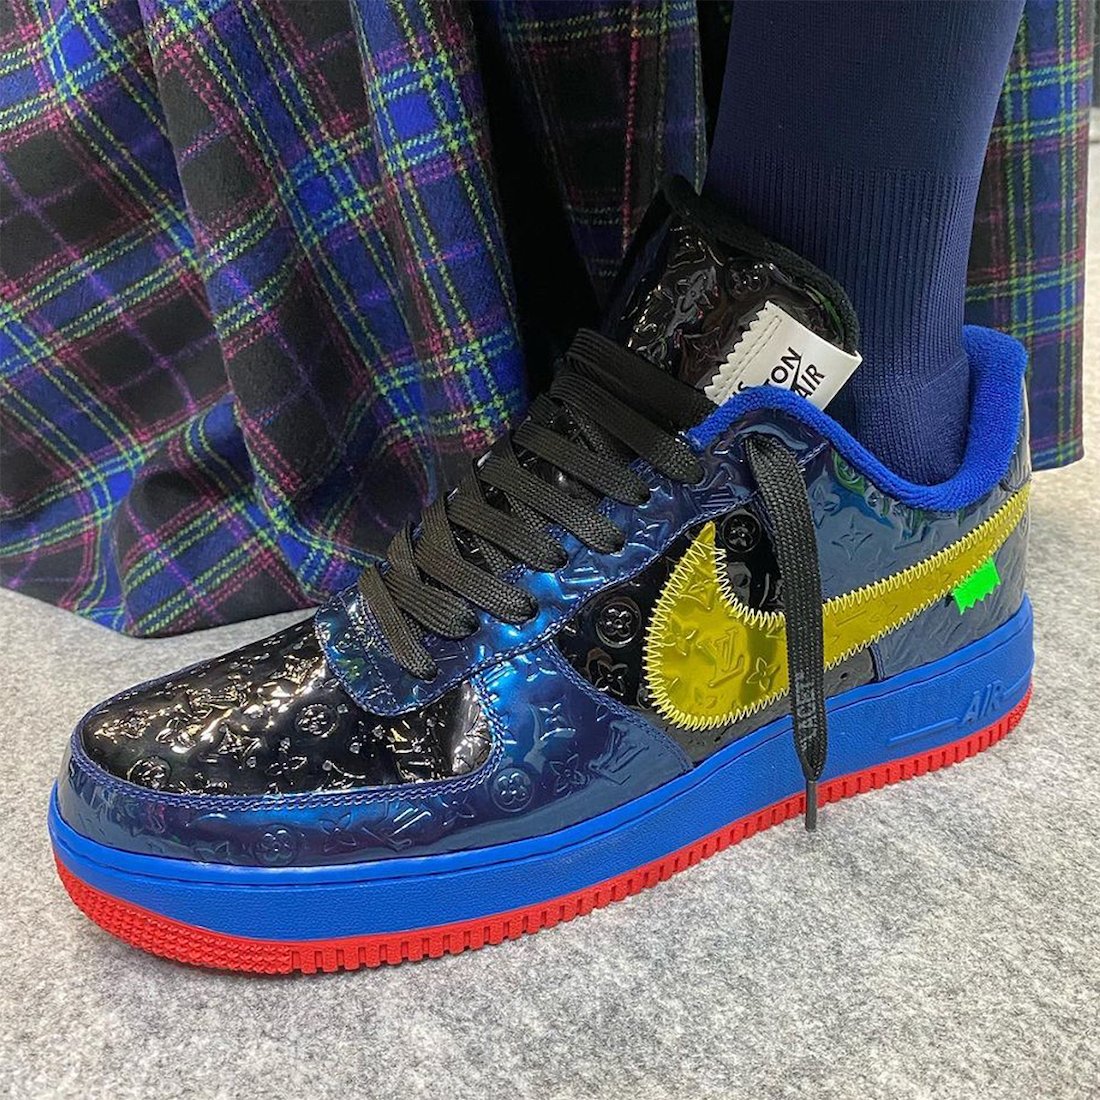 First Look at the Nike x Louis Vuitton Air Force 1 Sneakers